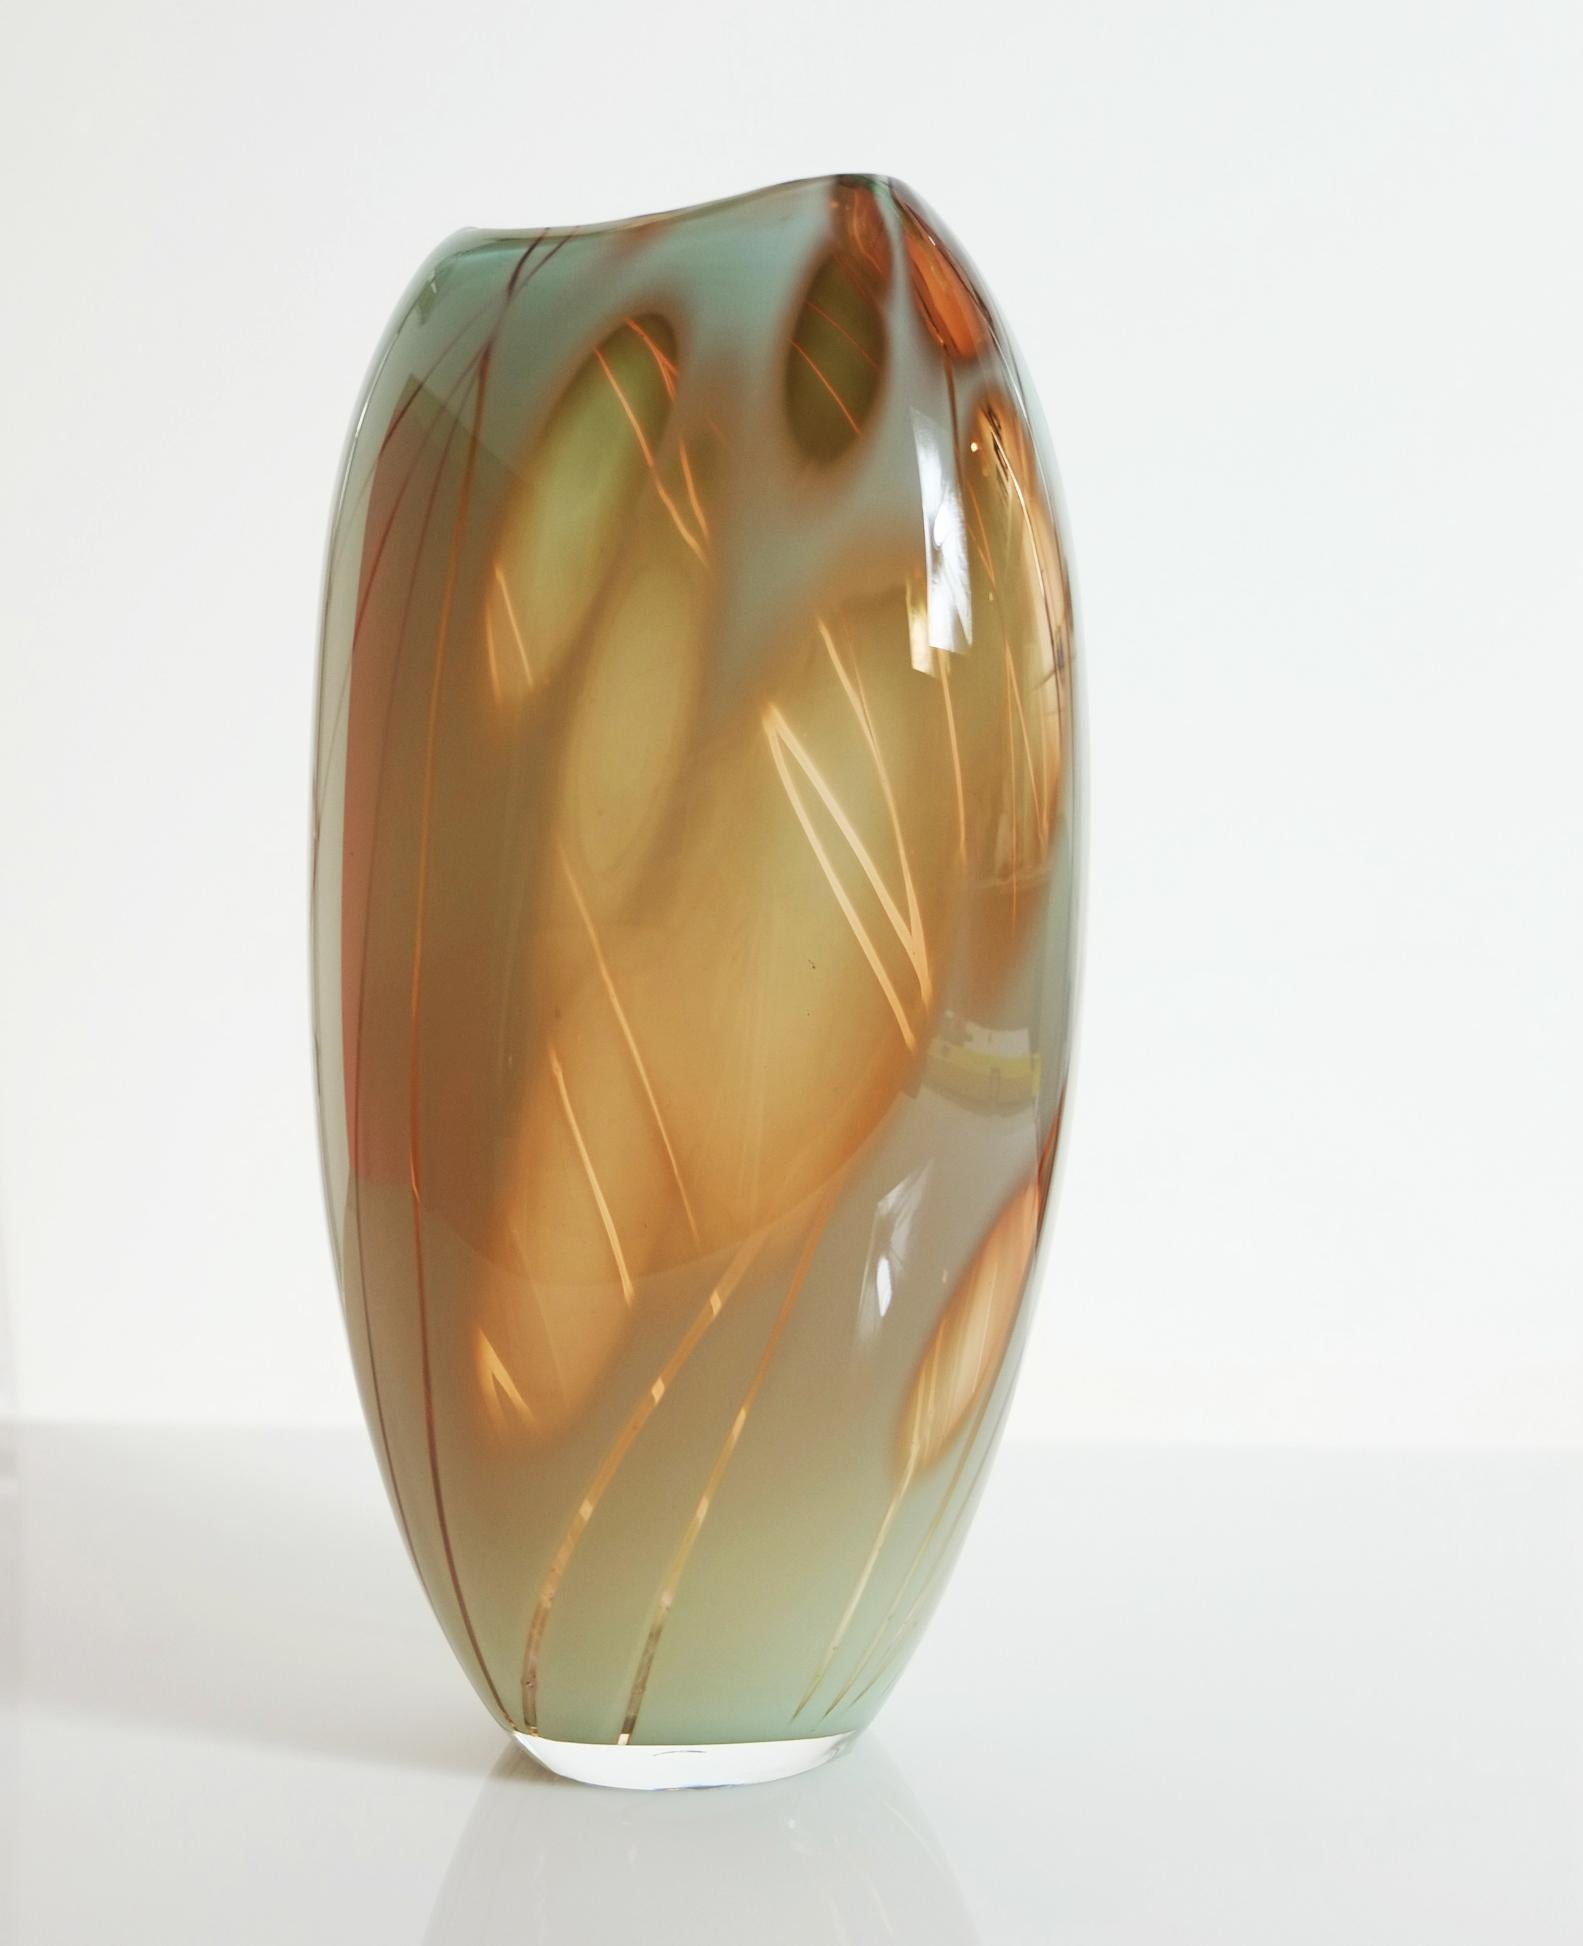 Dianthus glass vessel was inspired by the plant using celaden and apricot glass.
It was created using the classic Swedish technique of graal, where the pattern is hand cut on a lathe through using diamond engraving wheels through layers of overlayed